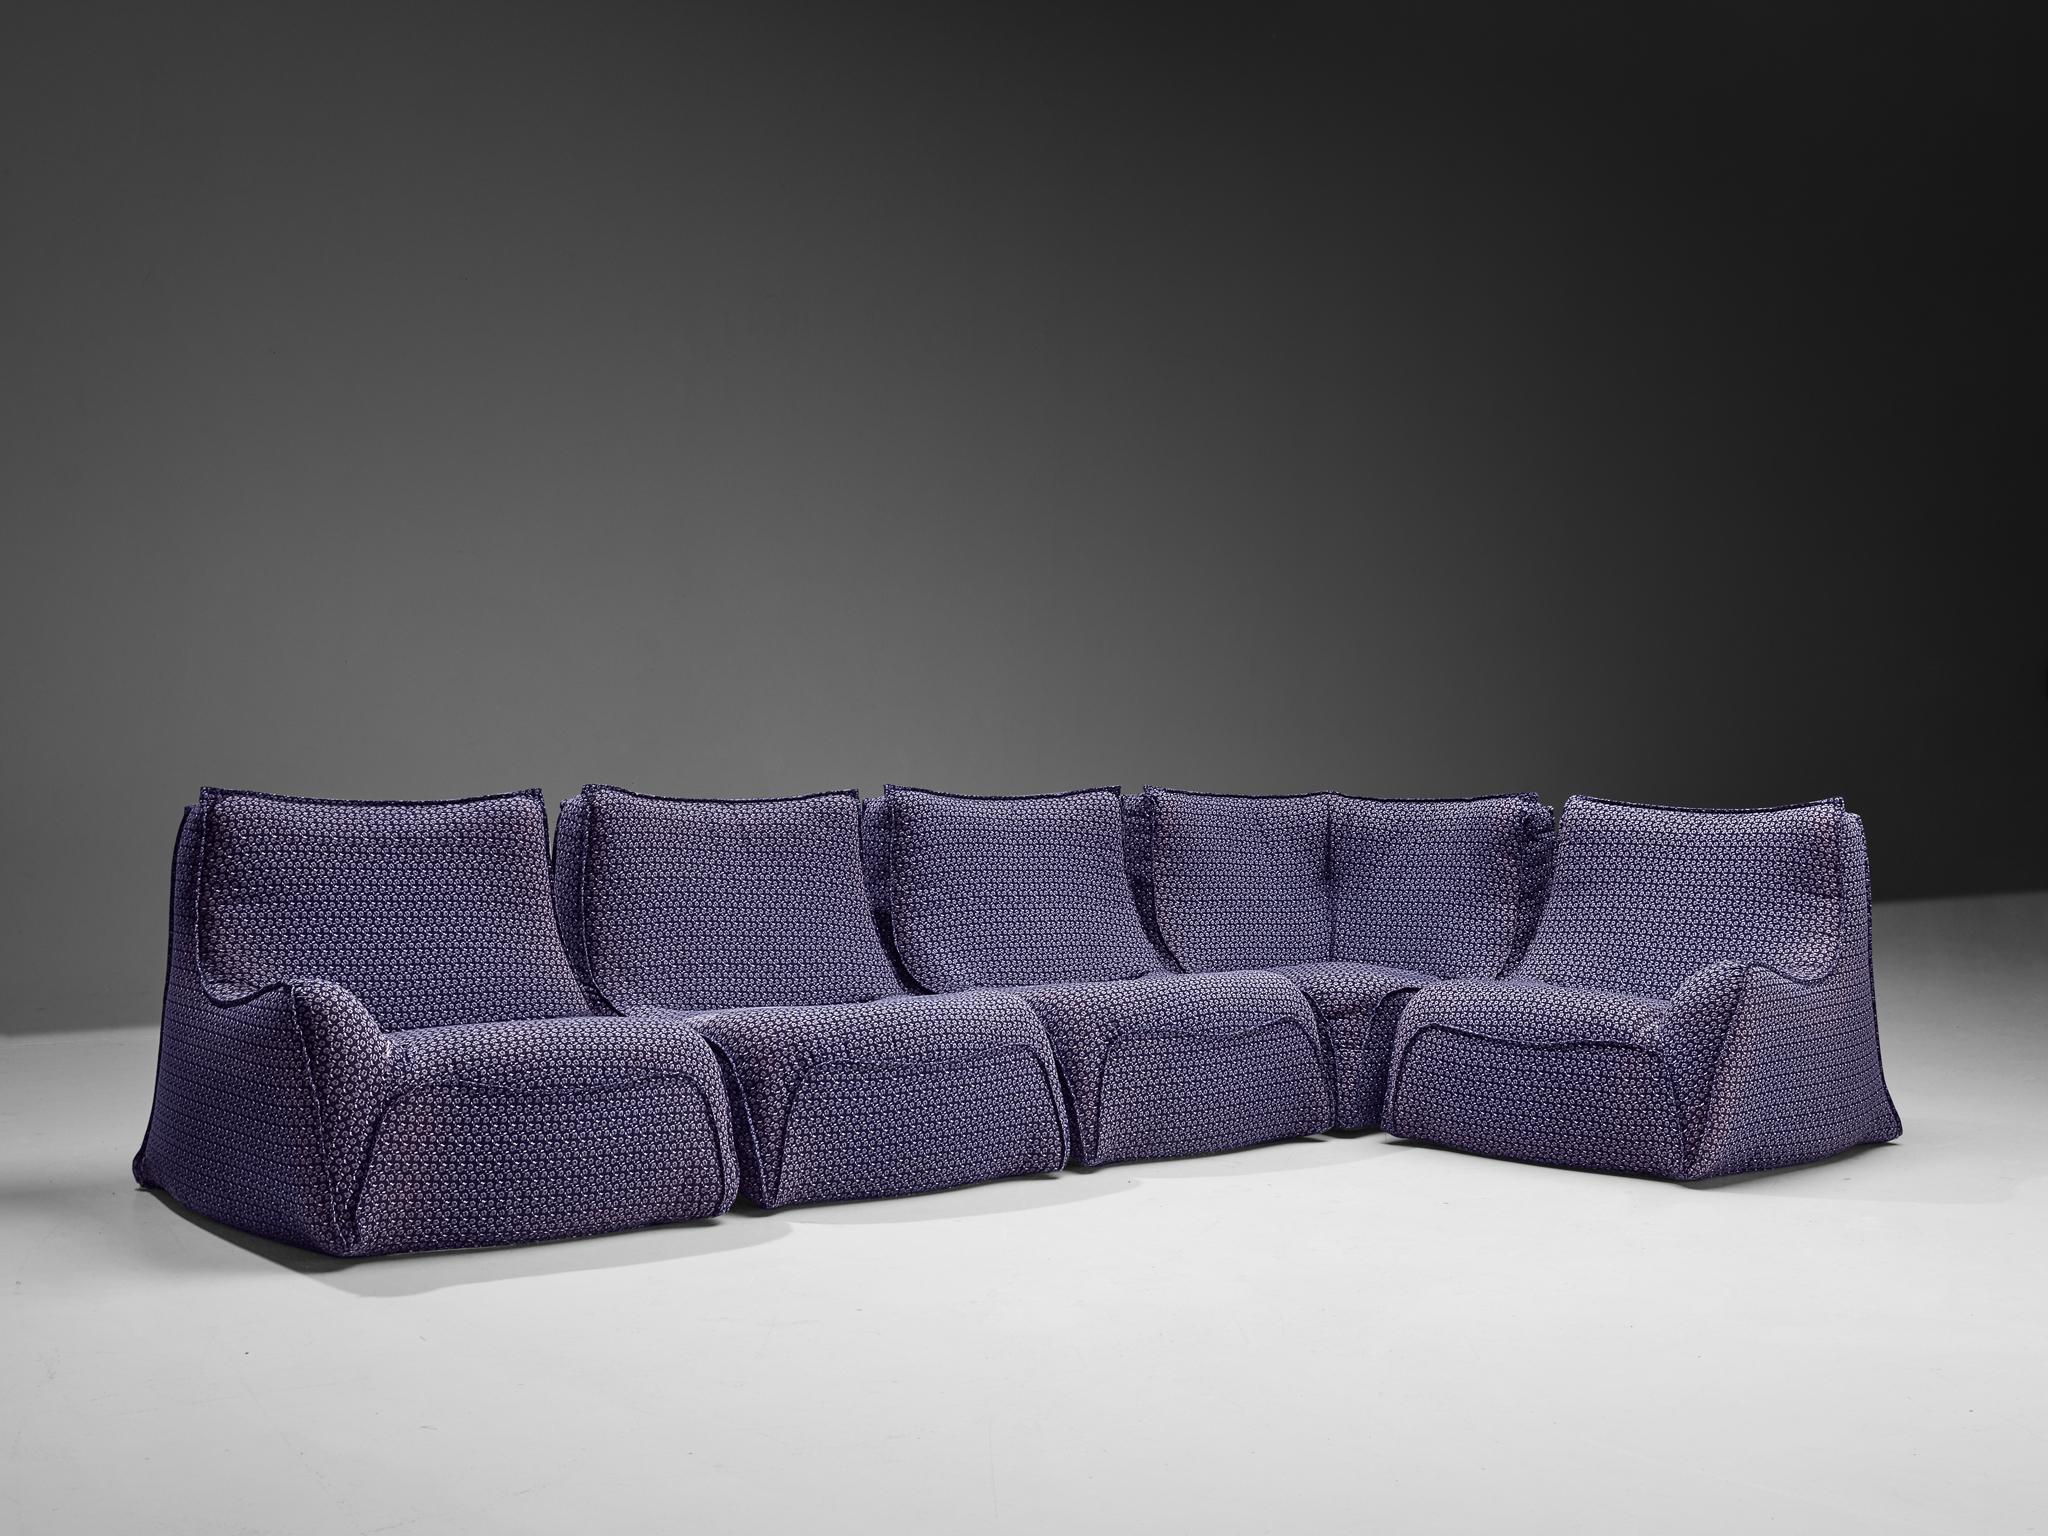 Rare Bernard Govin for Ligne Roset Sectional Sofa in Purple Upholstery In Good Condition For Sale In Waalwijk, NL